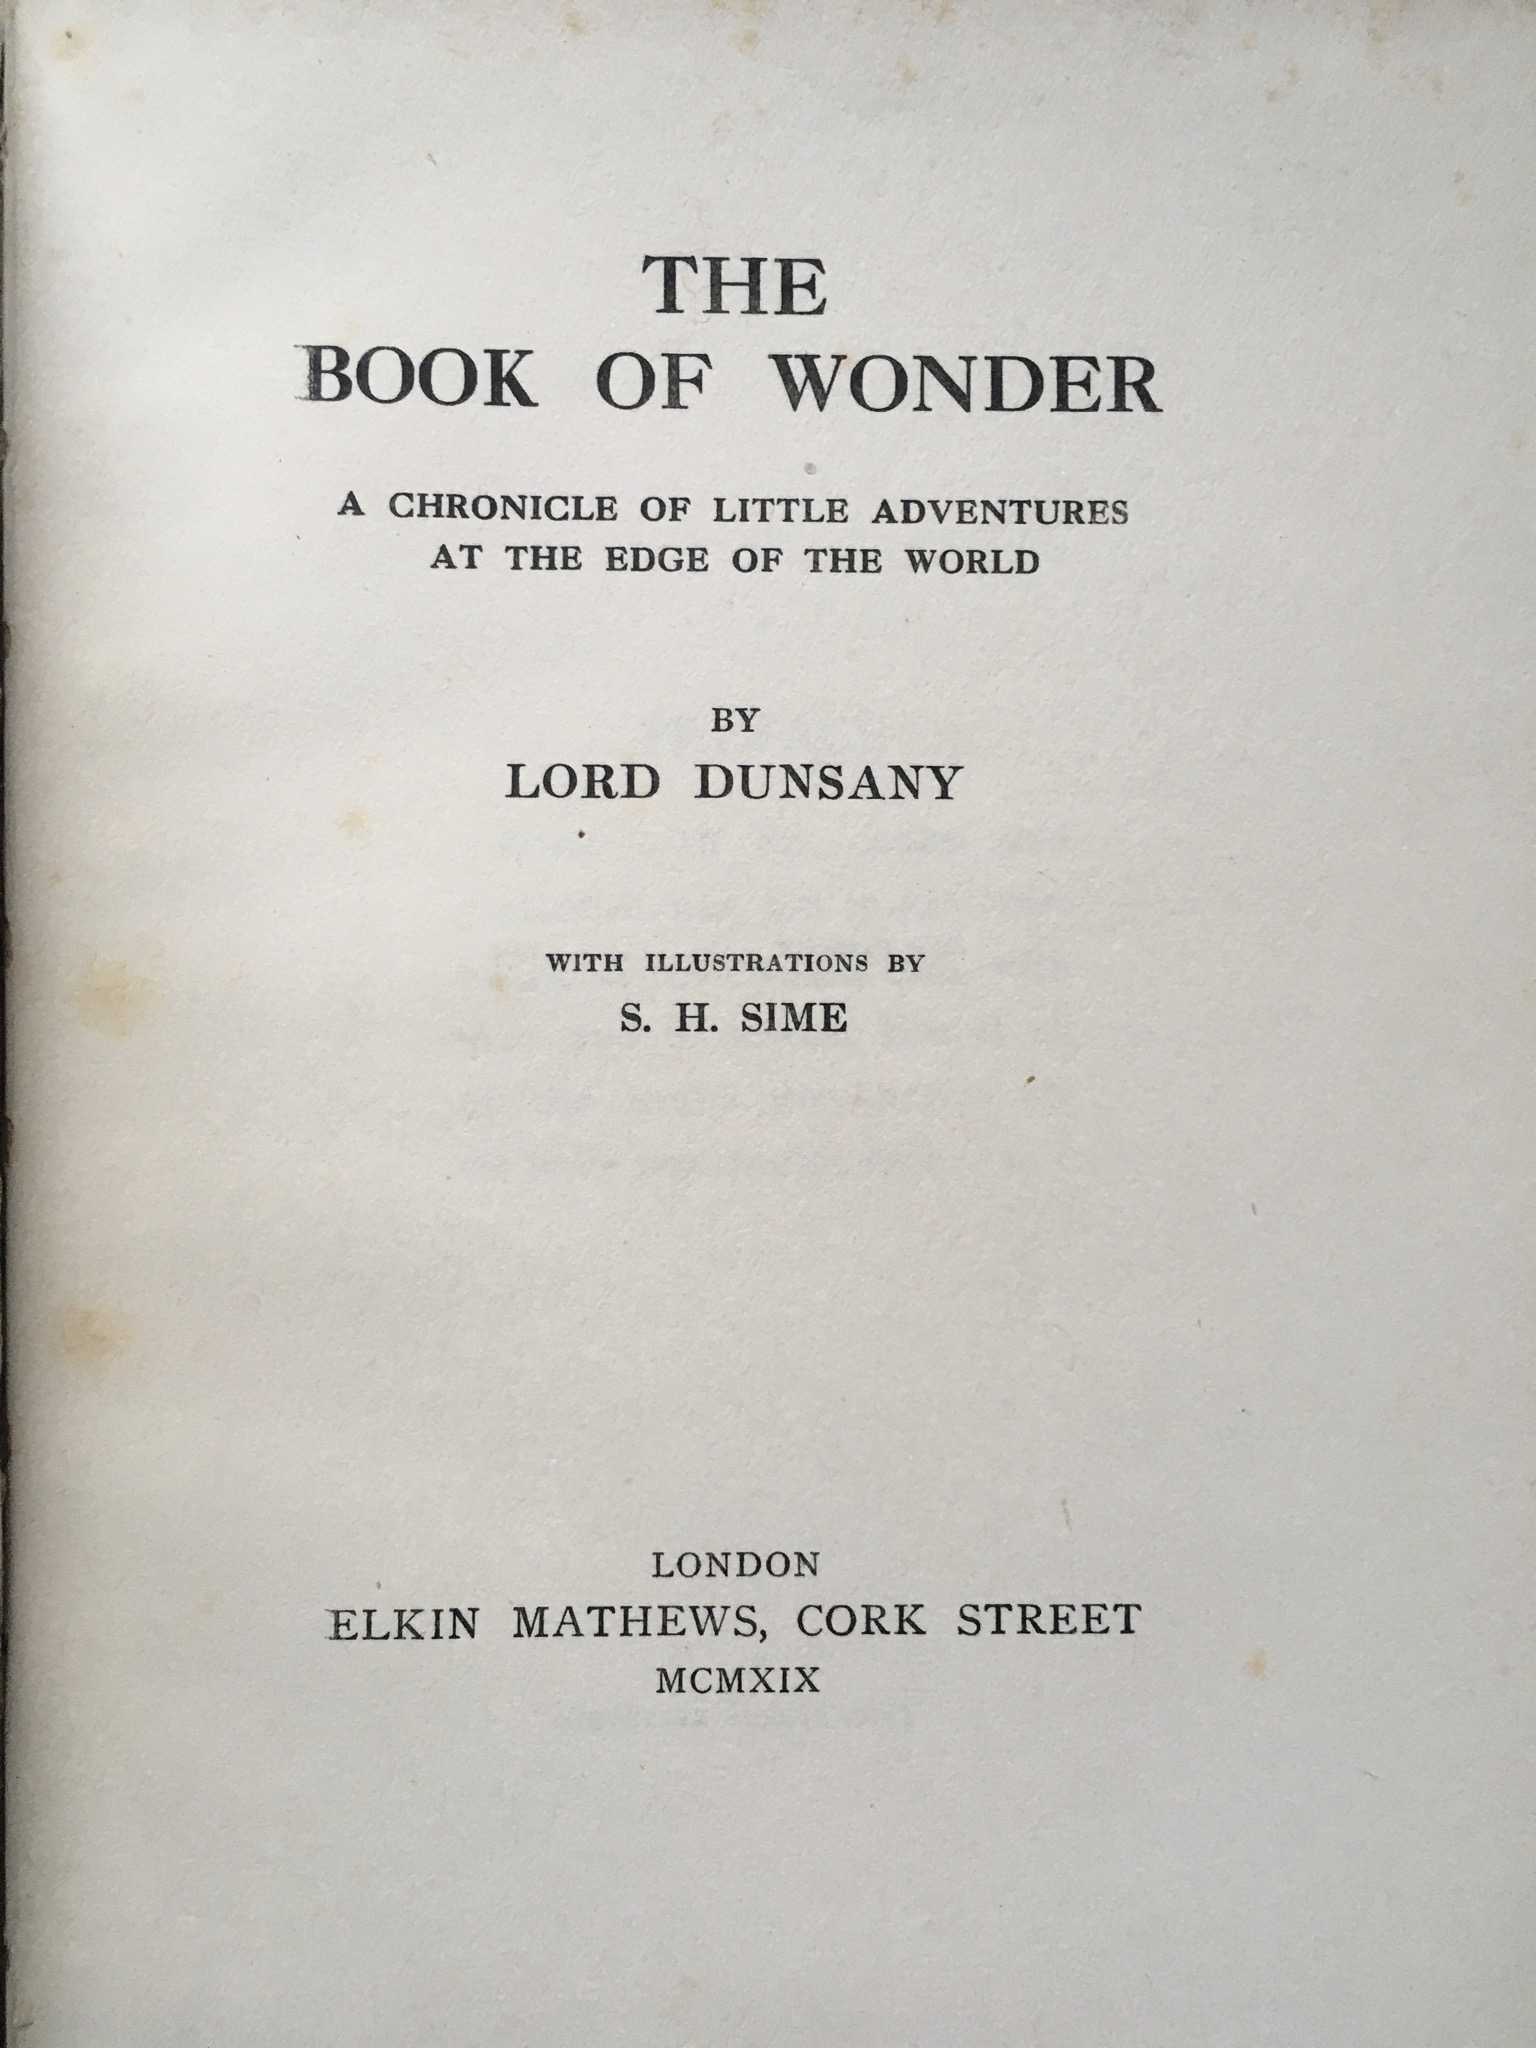 The Book of Wonder by Lord Dunsany Signed